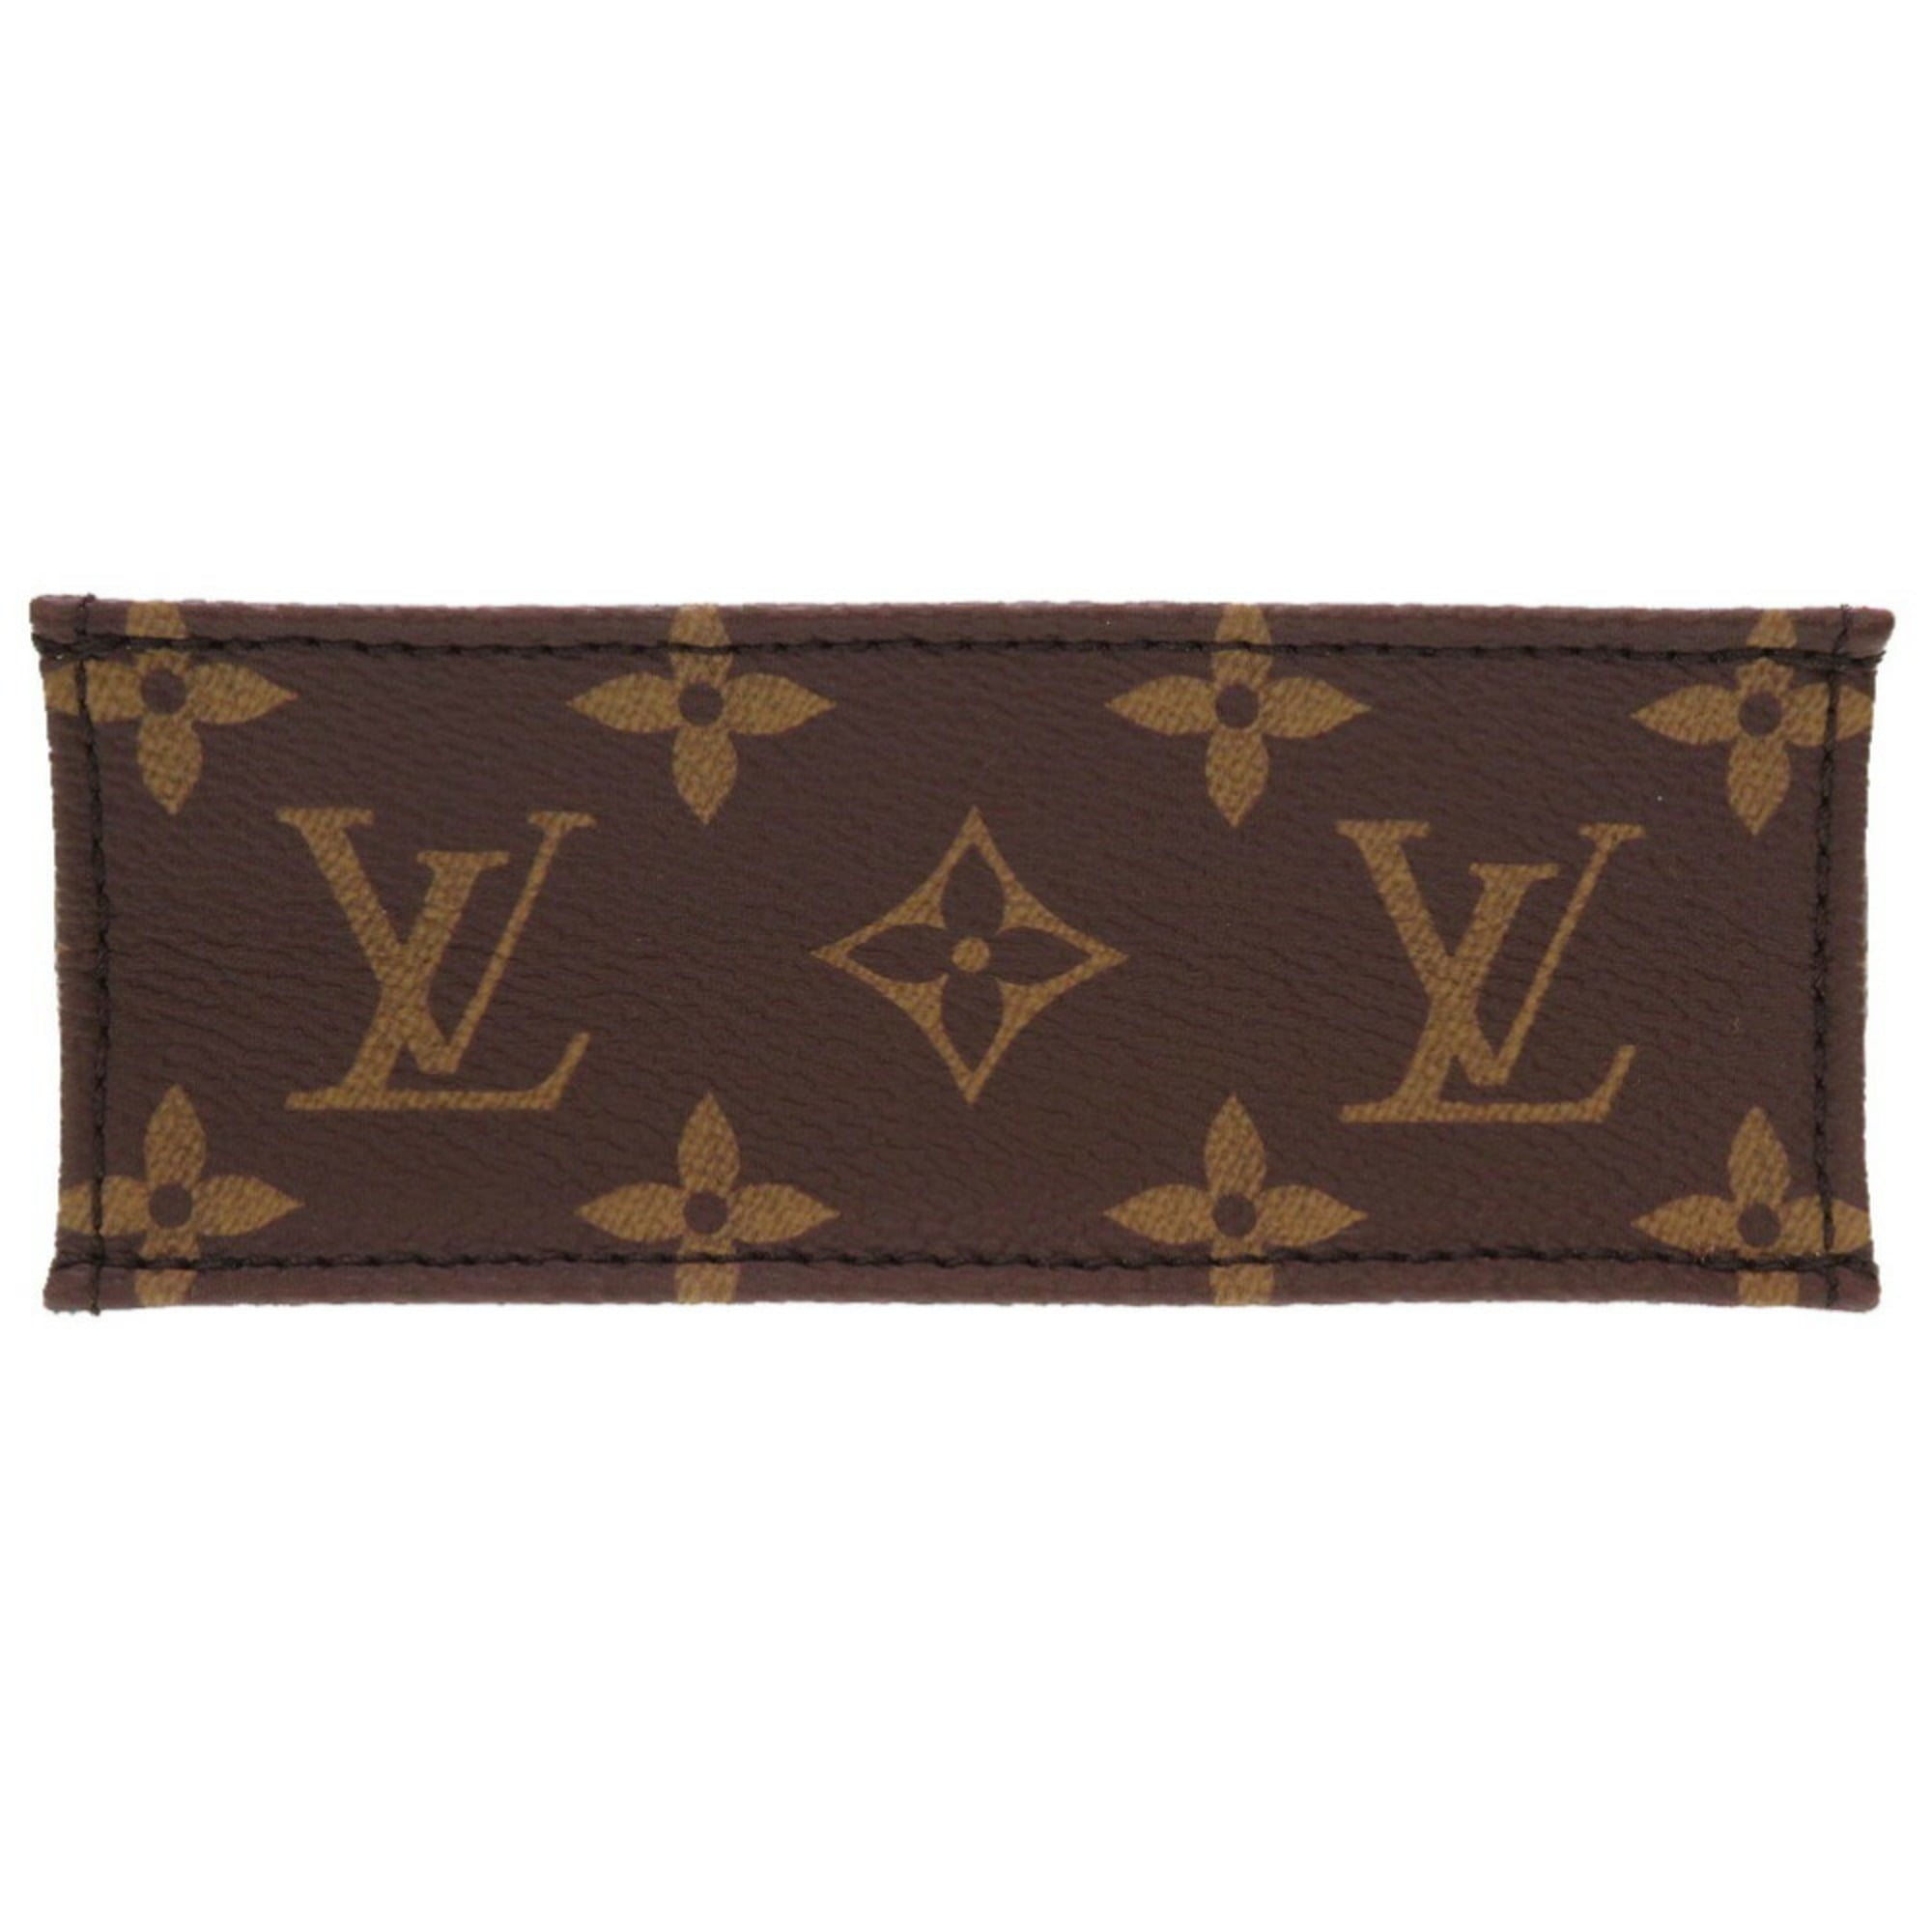 Authenticated used Louis Vuitton Louis Vuitton LV x YK Pochette Kirigami Pouch Yayoi Kusama Collaboration Dot Leather M81959 Black Yellow Red White